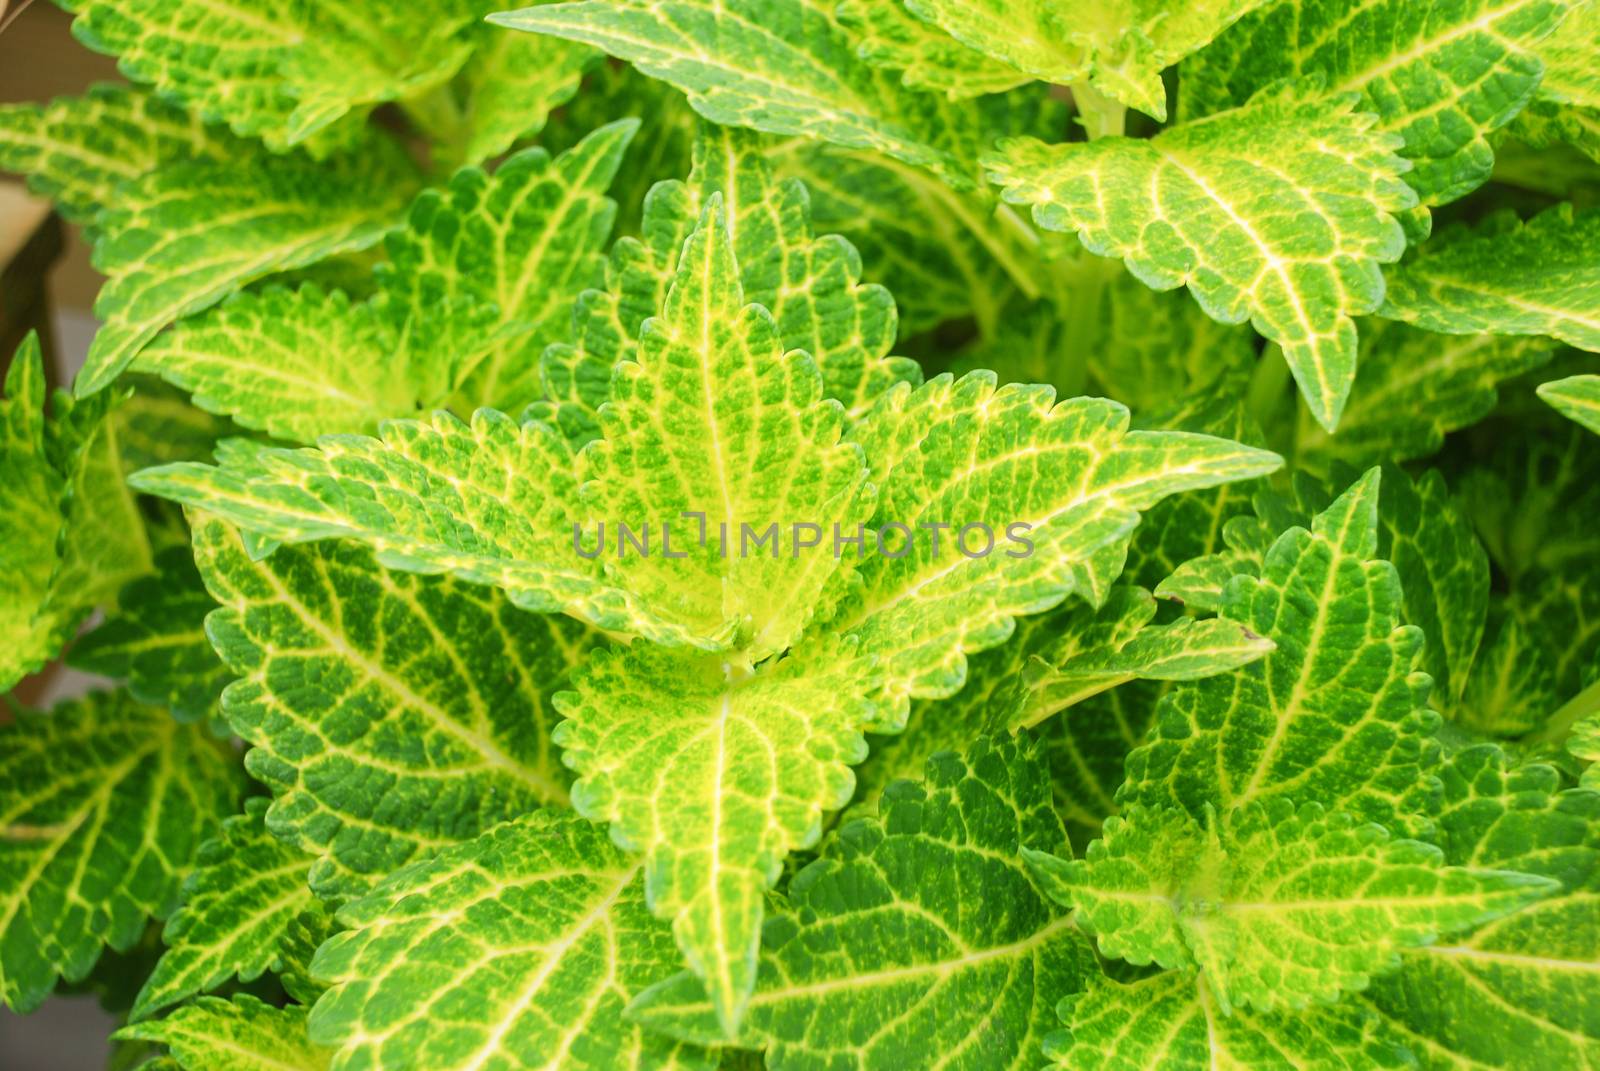 Green leaves of the coleus plant, Plectranthus scutellarioides by yuiyuize